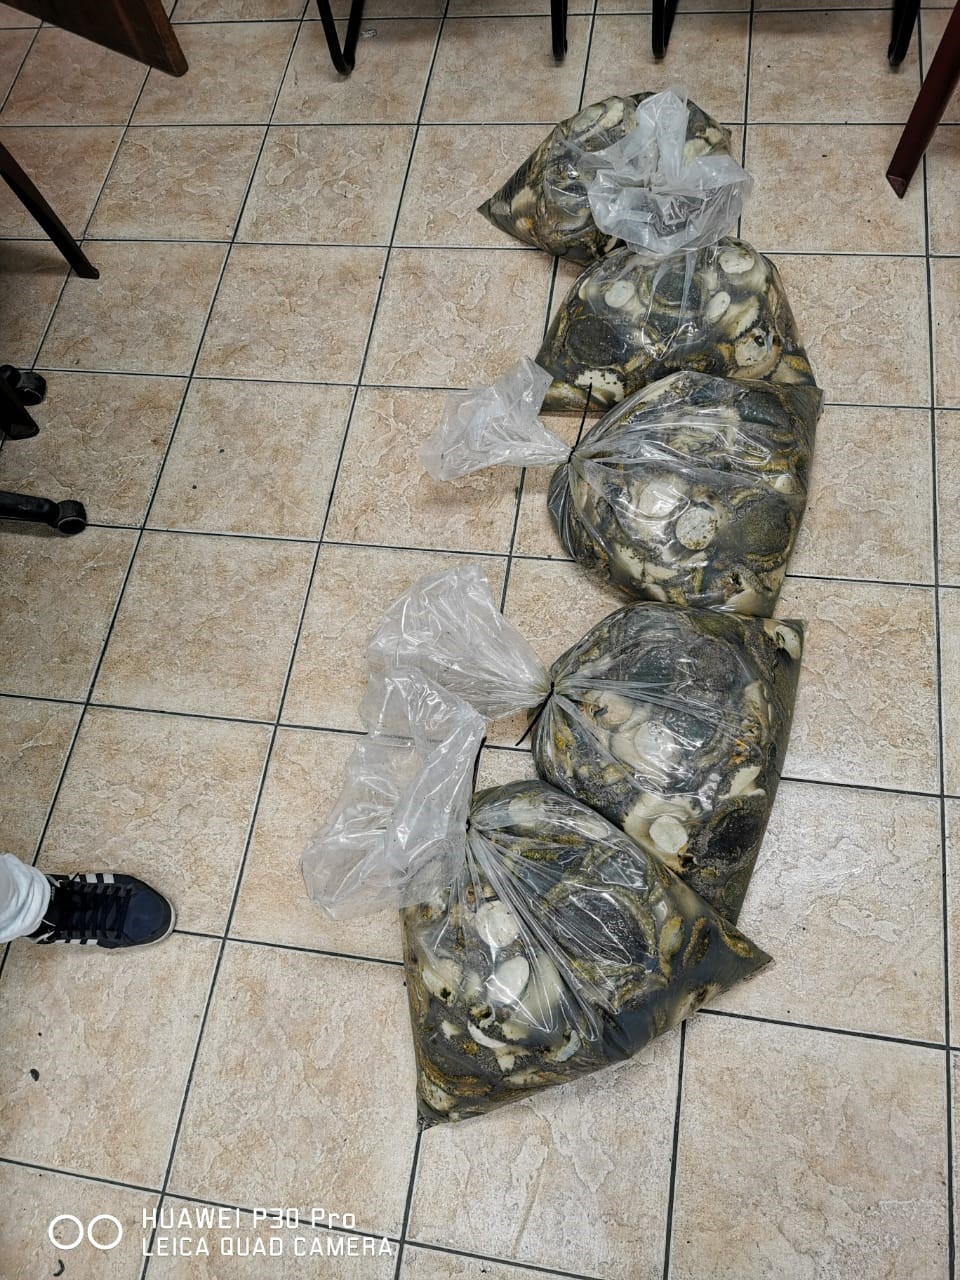 Suspect arrested with abalone and three others with firearms